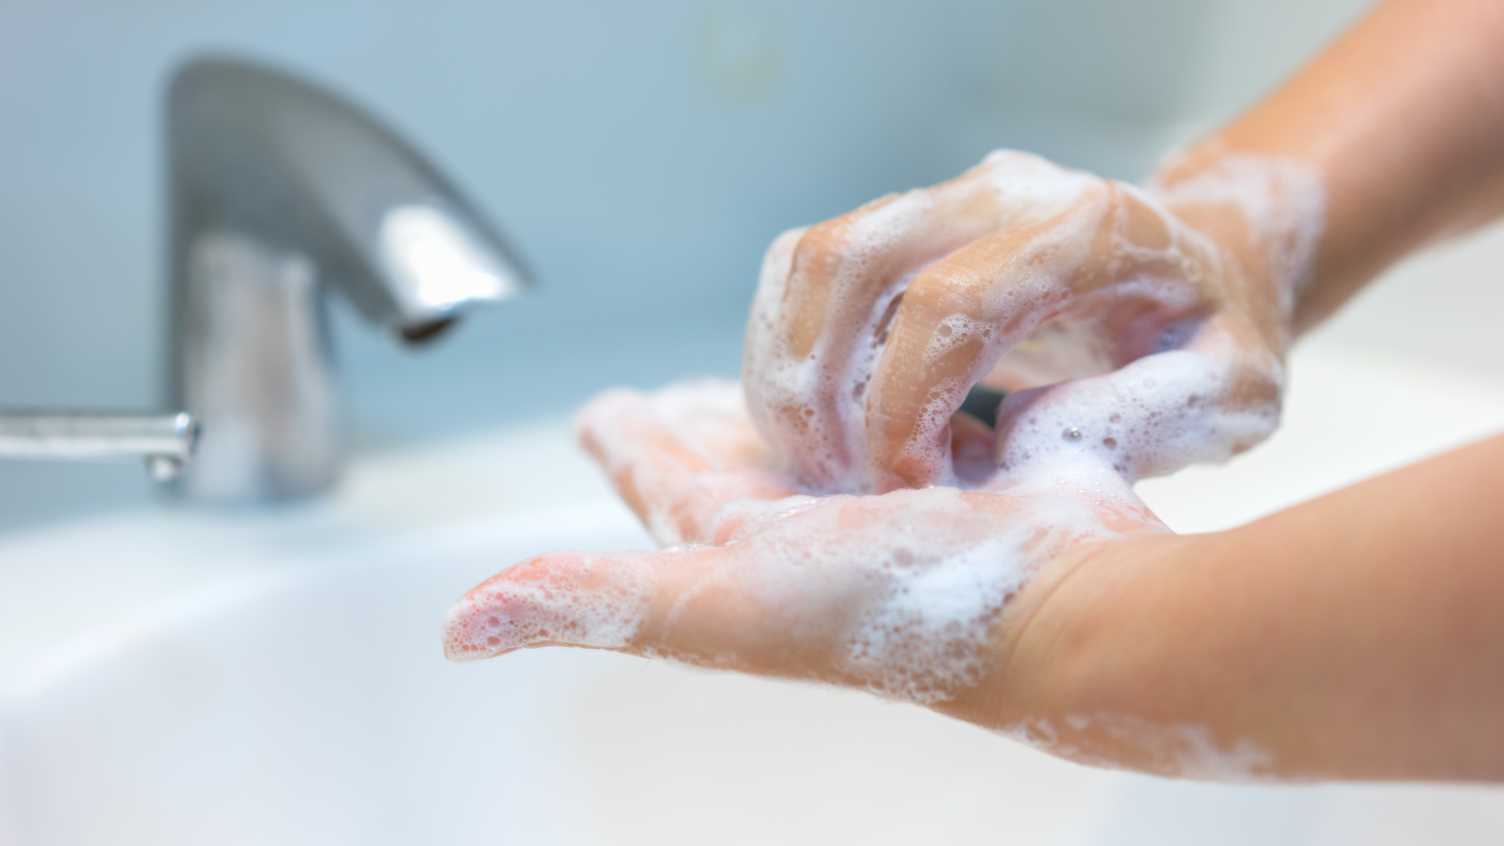 Gentle cleansers kill viruses as effectively as harsh soaps, study finds  | News